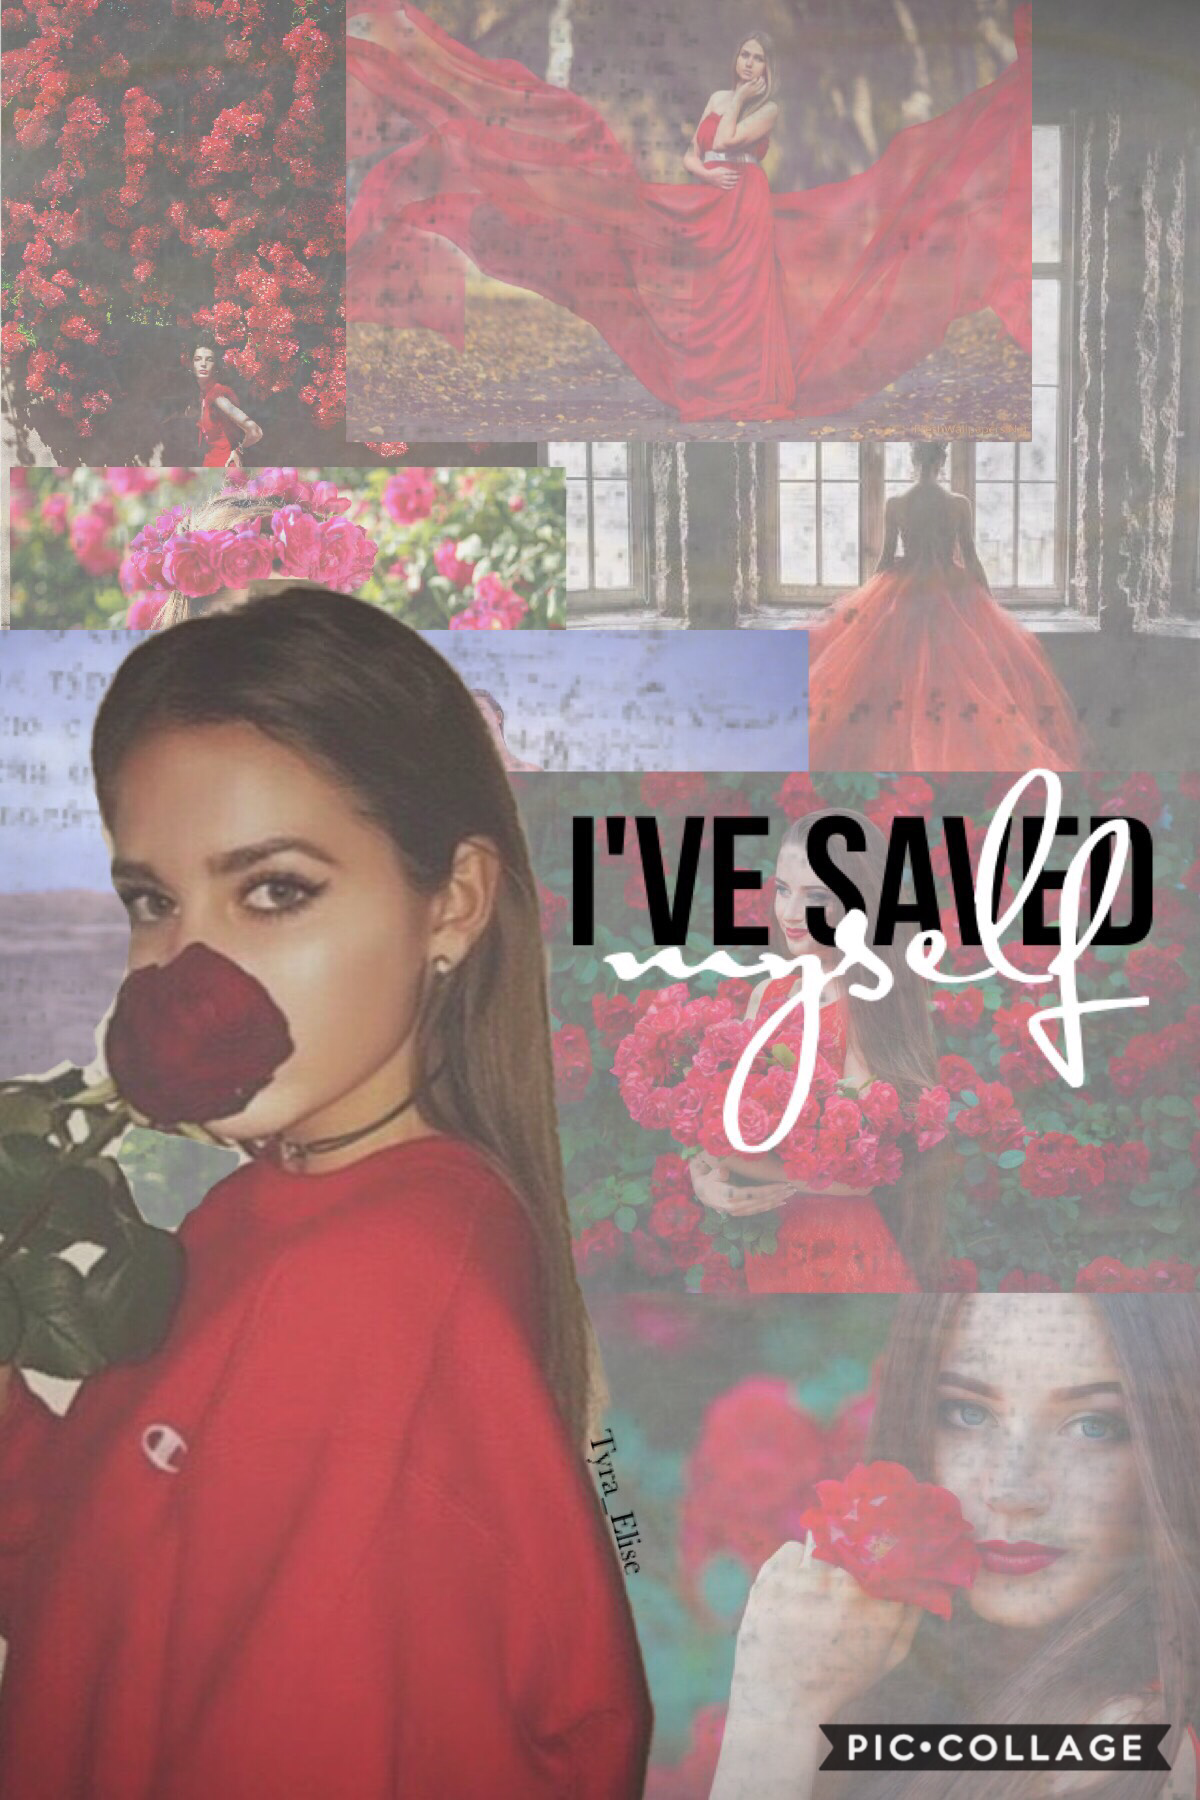 Tappyyy
Inspired by the amazing meandmeonly!! Her acc is absolutely gorgeous! Btw starting a new theme, the random theme 😝. 
QOTD: What time is it where you live?
AOTD: 10:04pm

